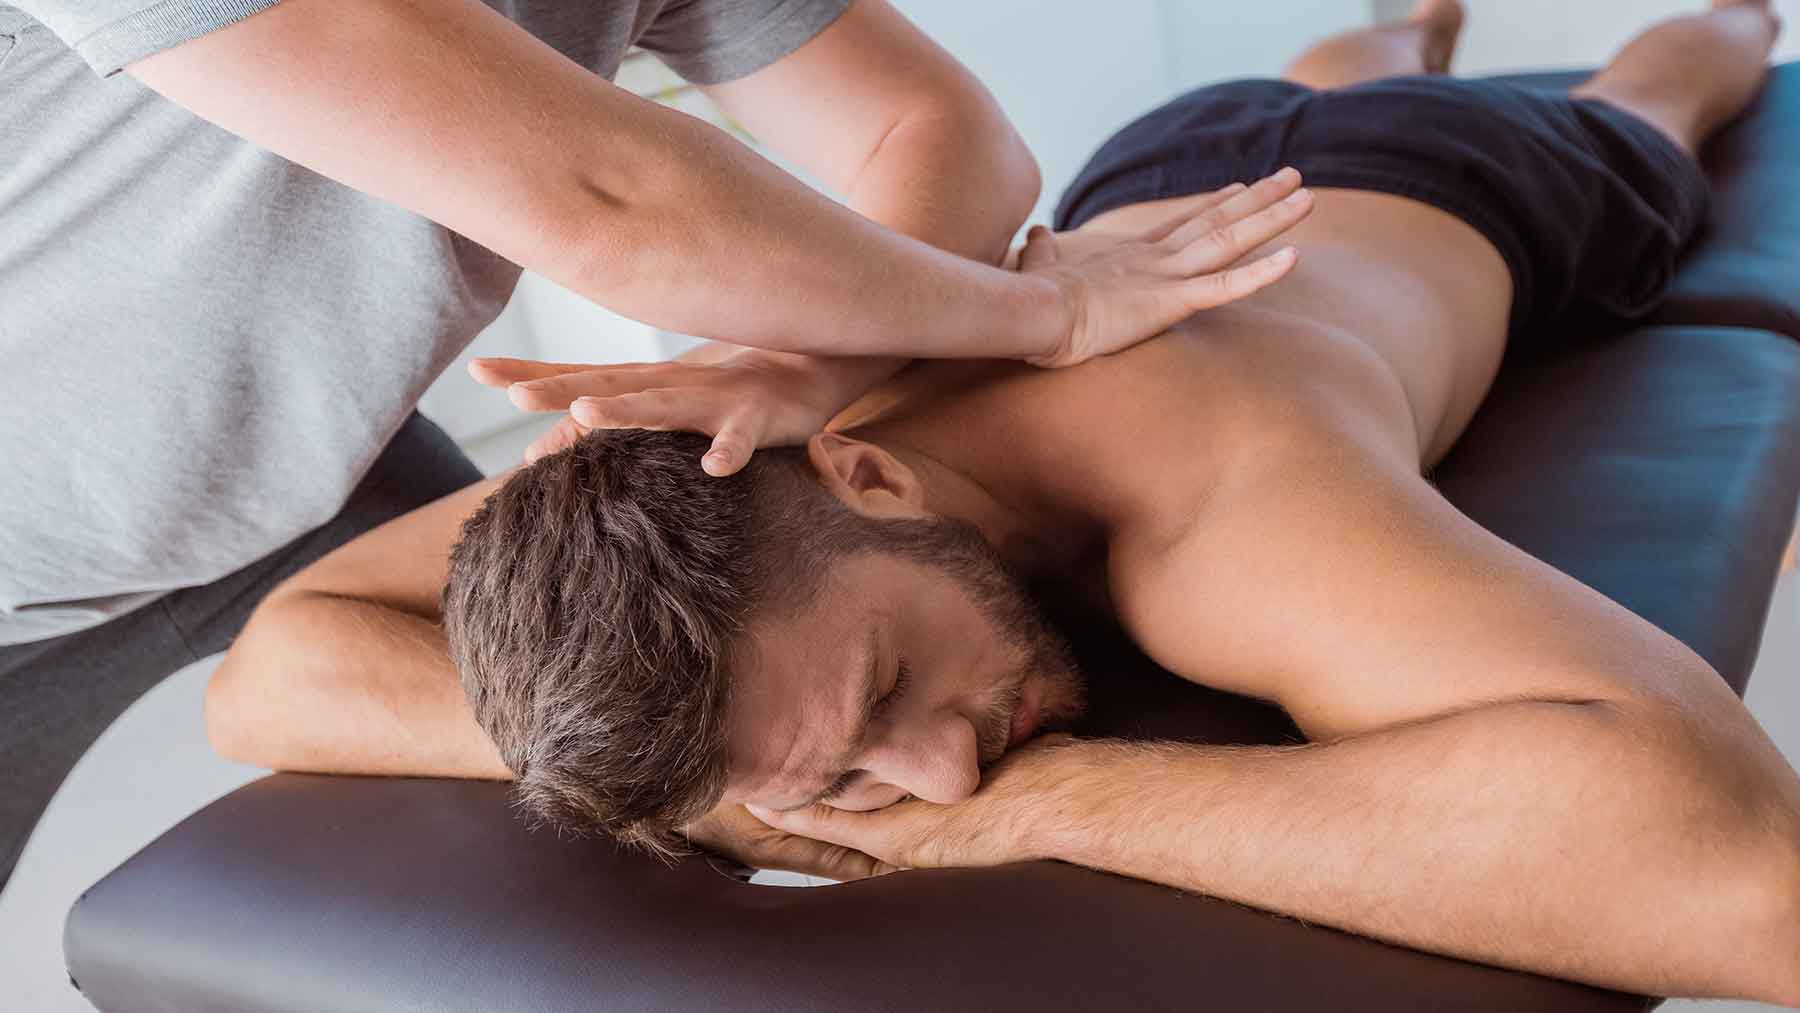 What are the benefits of medical massage? | Ohio State Medical Center